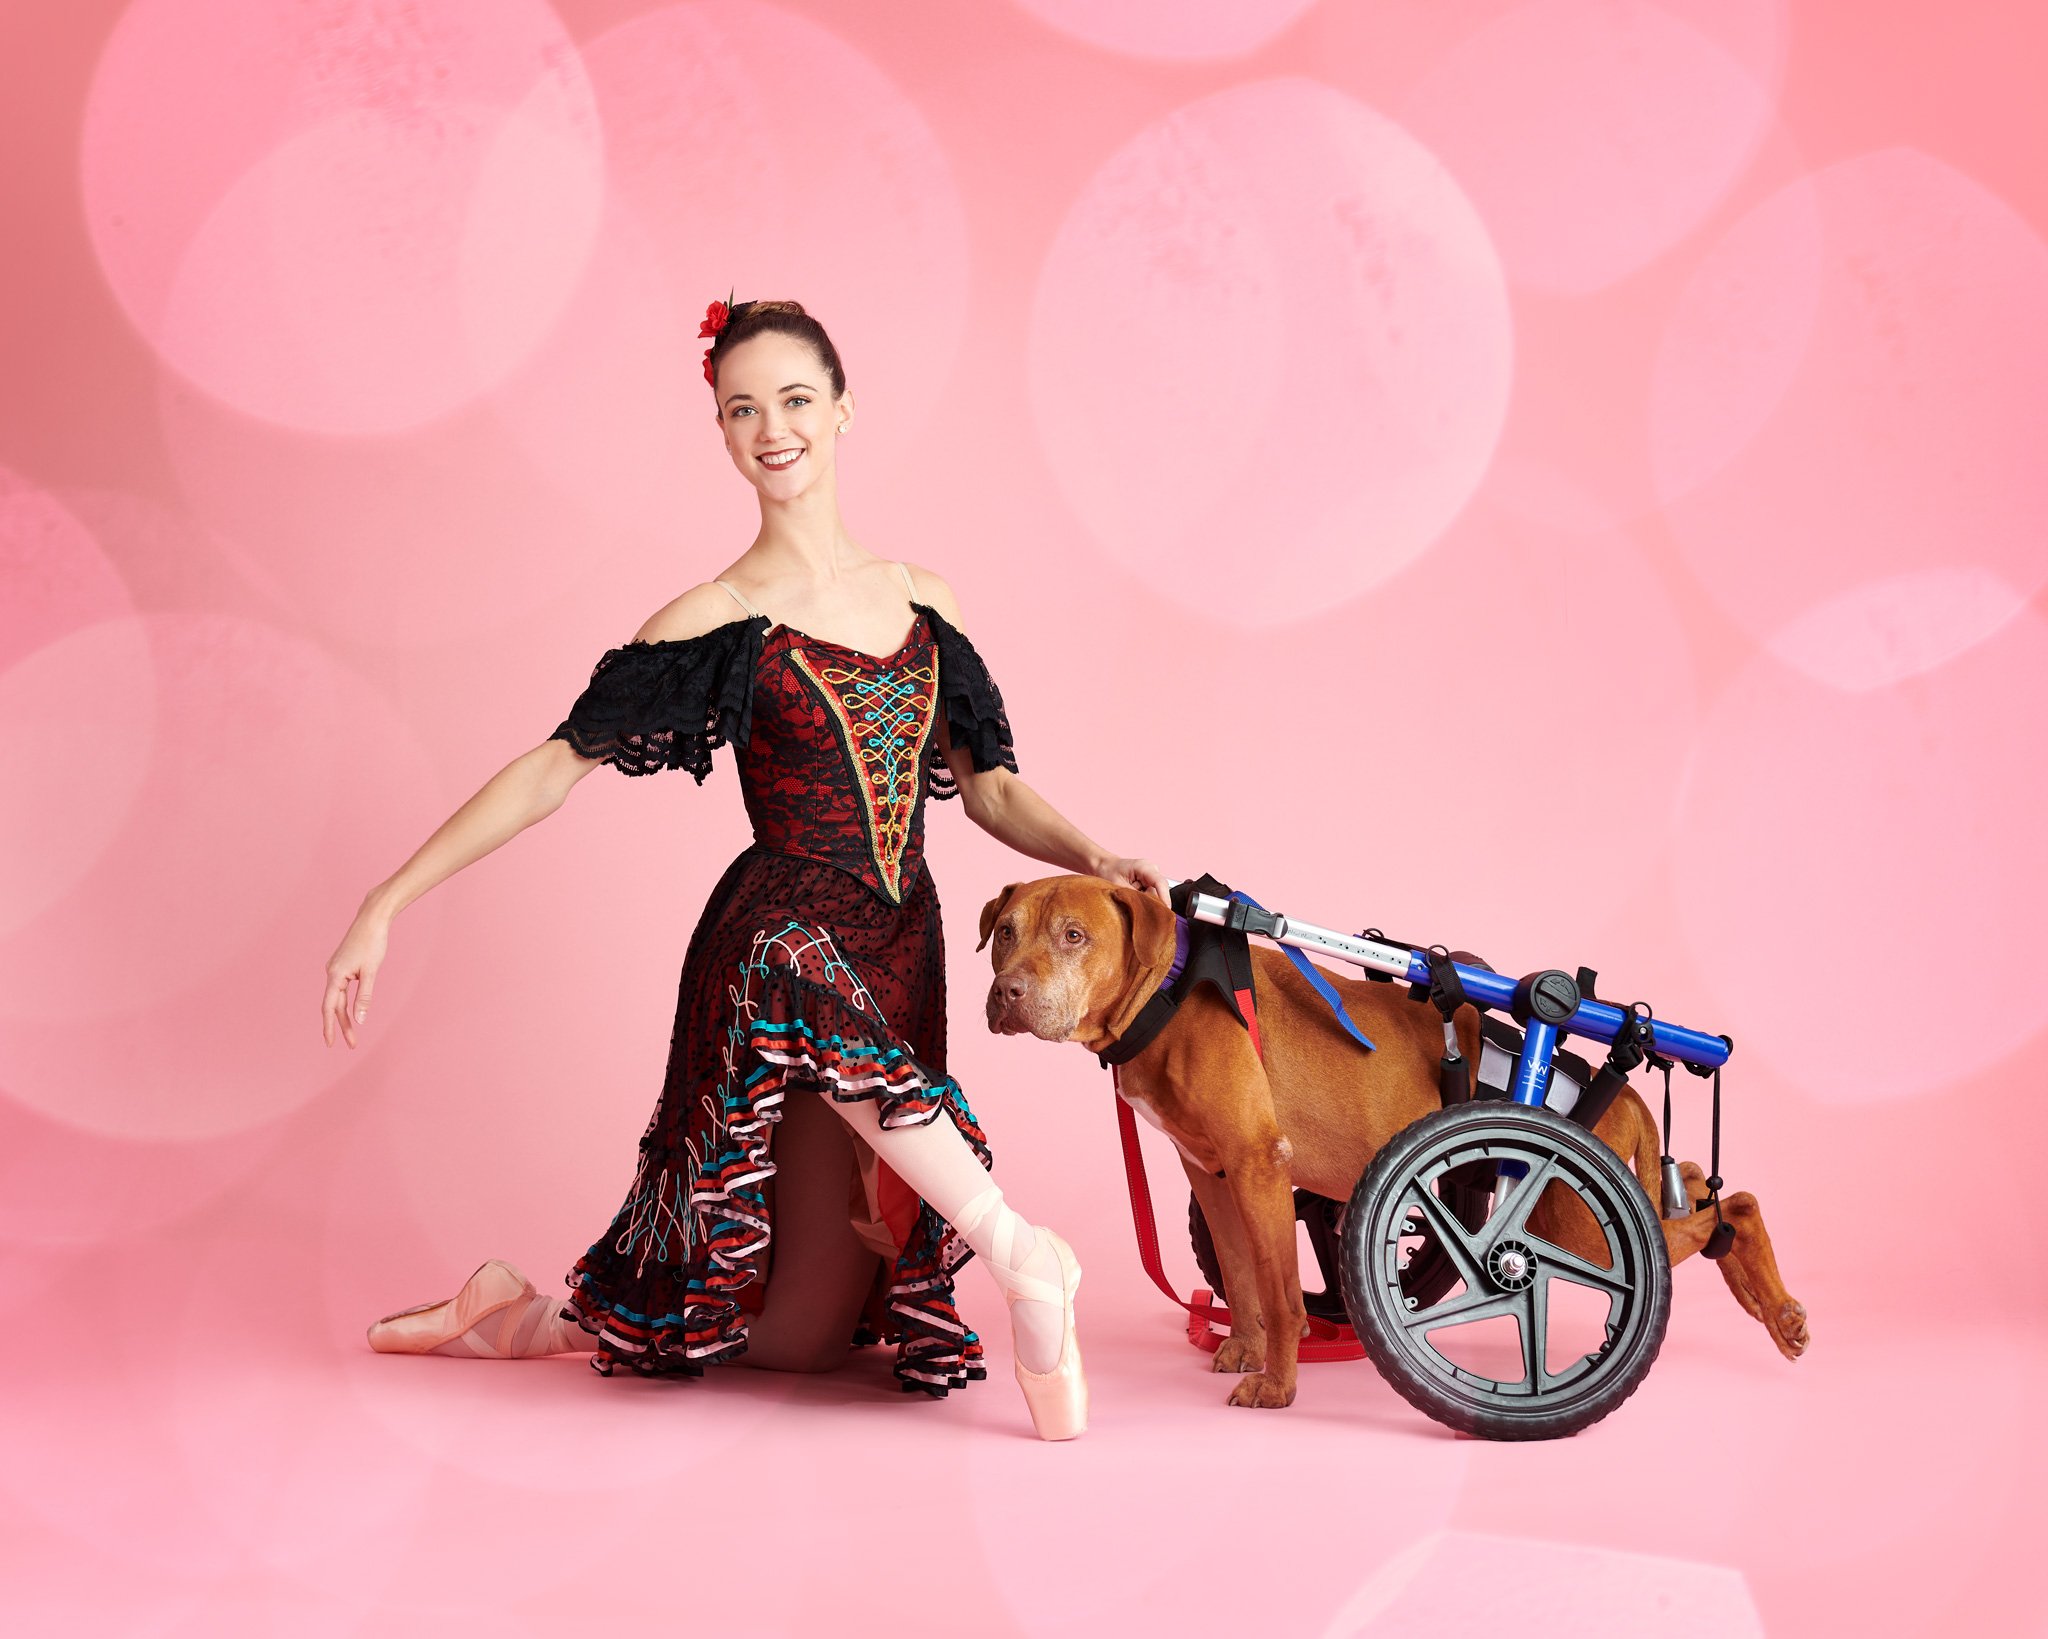 Photo of a ballerina posing alongside disabled dog in rolling harness against a pink background.